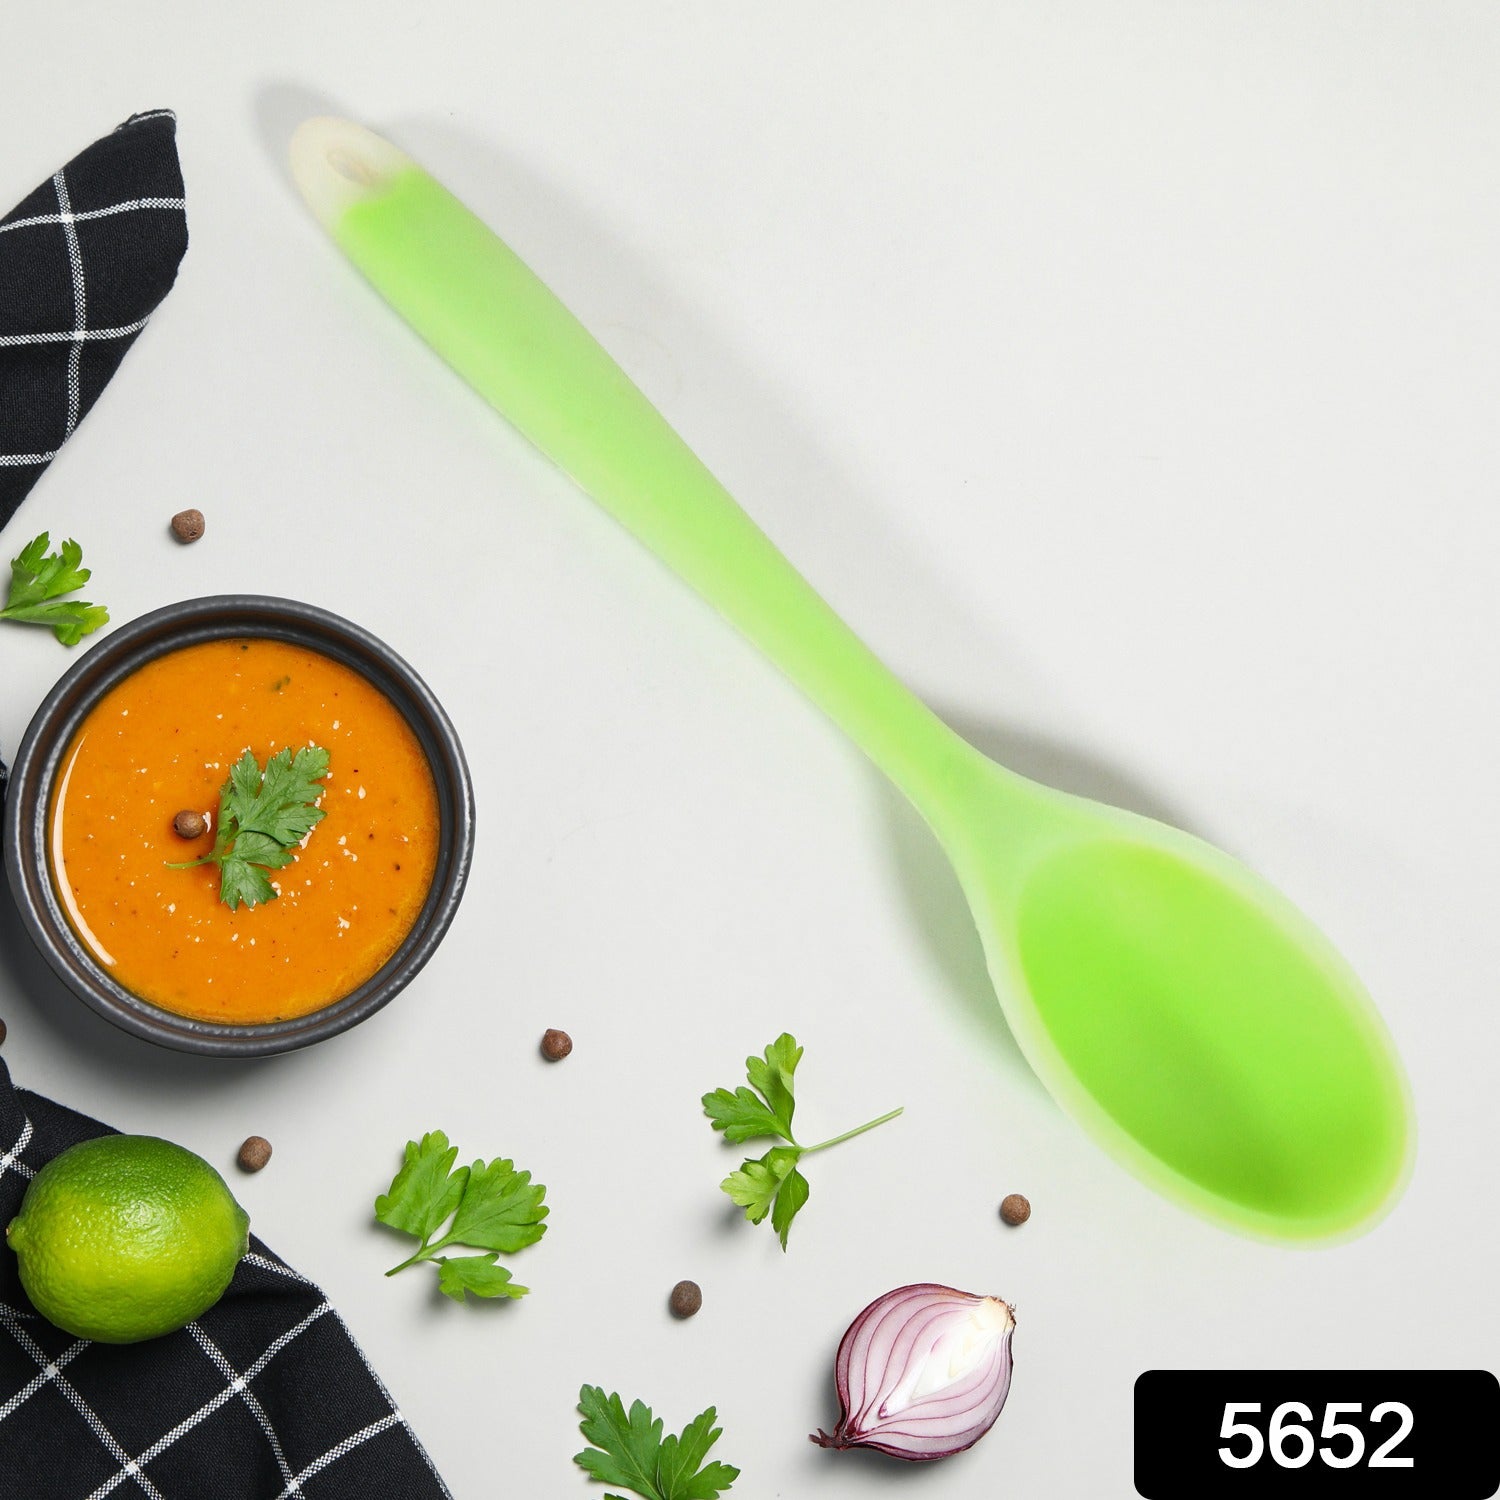 5652 Multipurpose Silicone Spoon, Silicone Basting Spoon Non-Stick Kitchen Utensils Household Gadgets Heat-Resistant Non Stick Spoons Kitchen Cookware Items For Cooking (1 pc / 27 Cm)